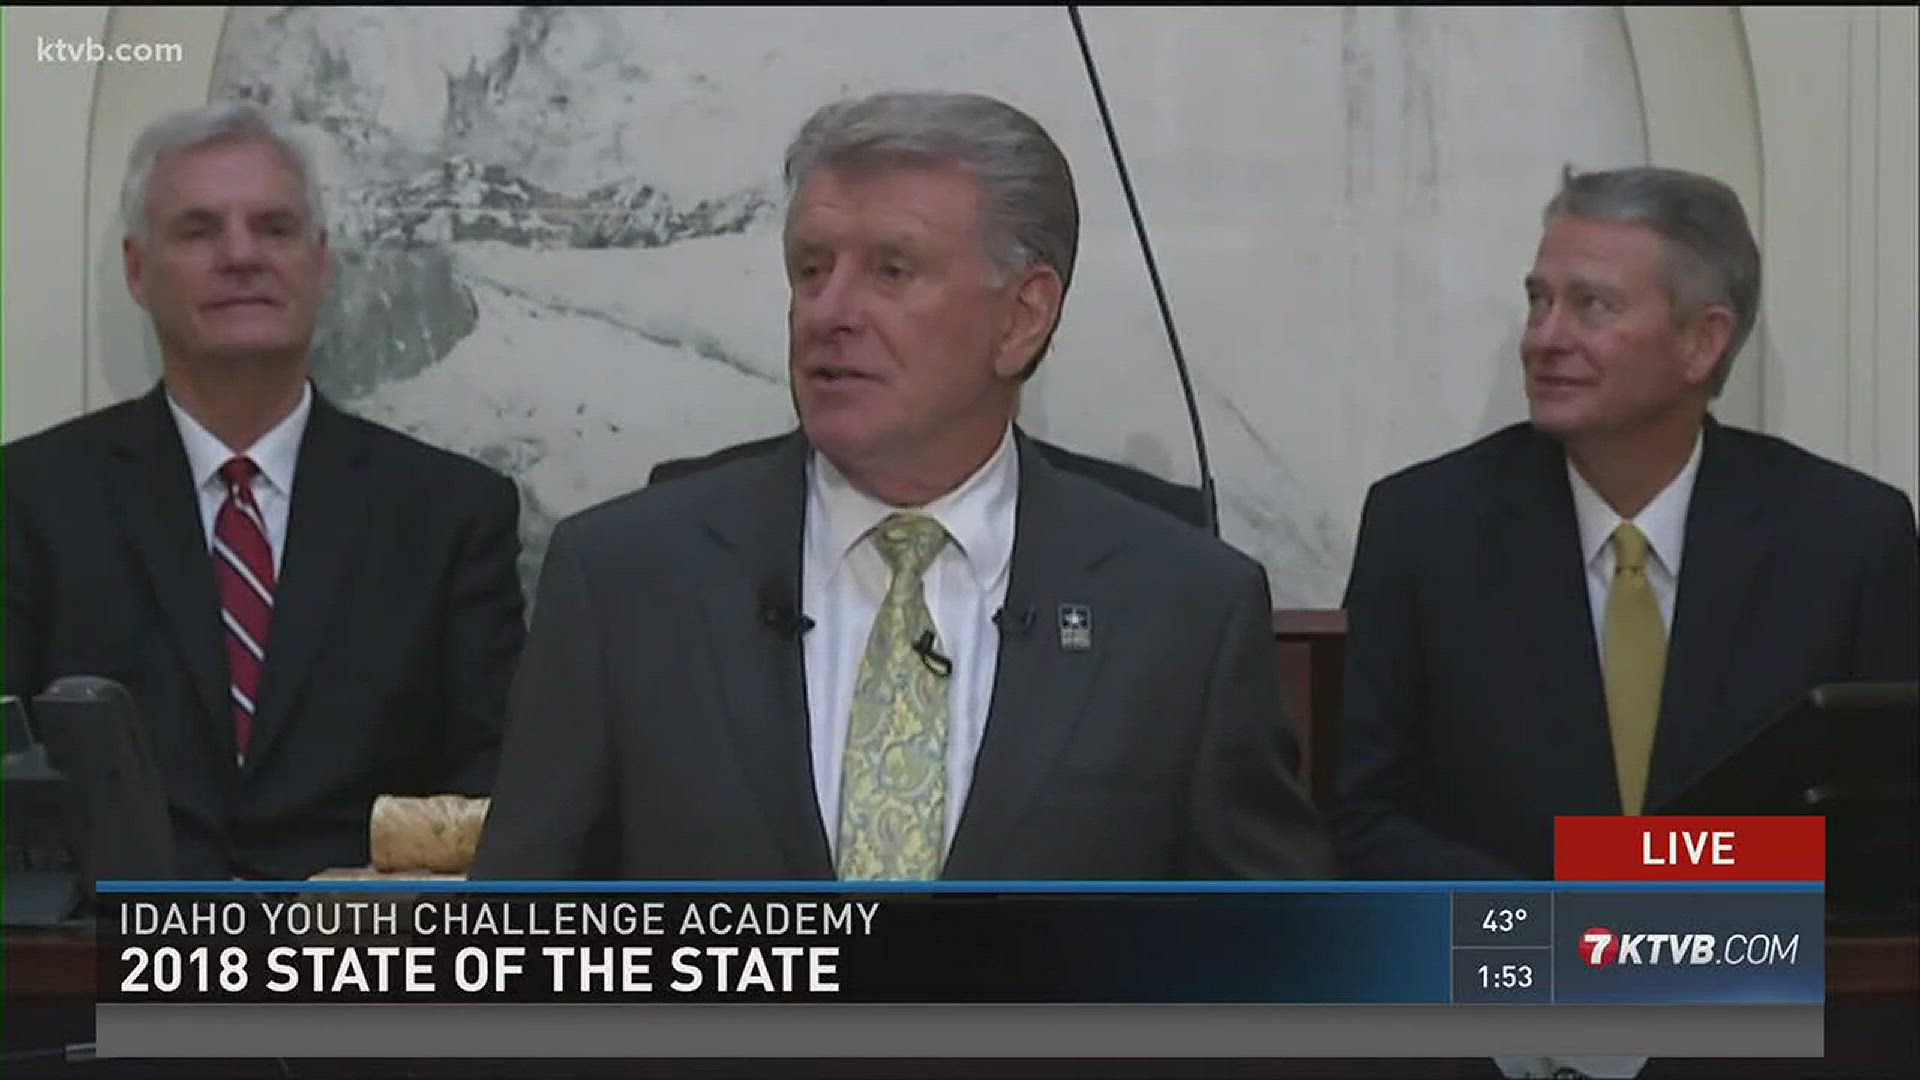 The governor delivered his remarks Monday before the full Legislature.